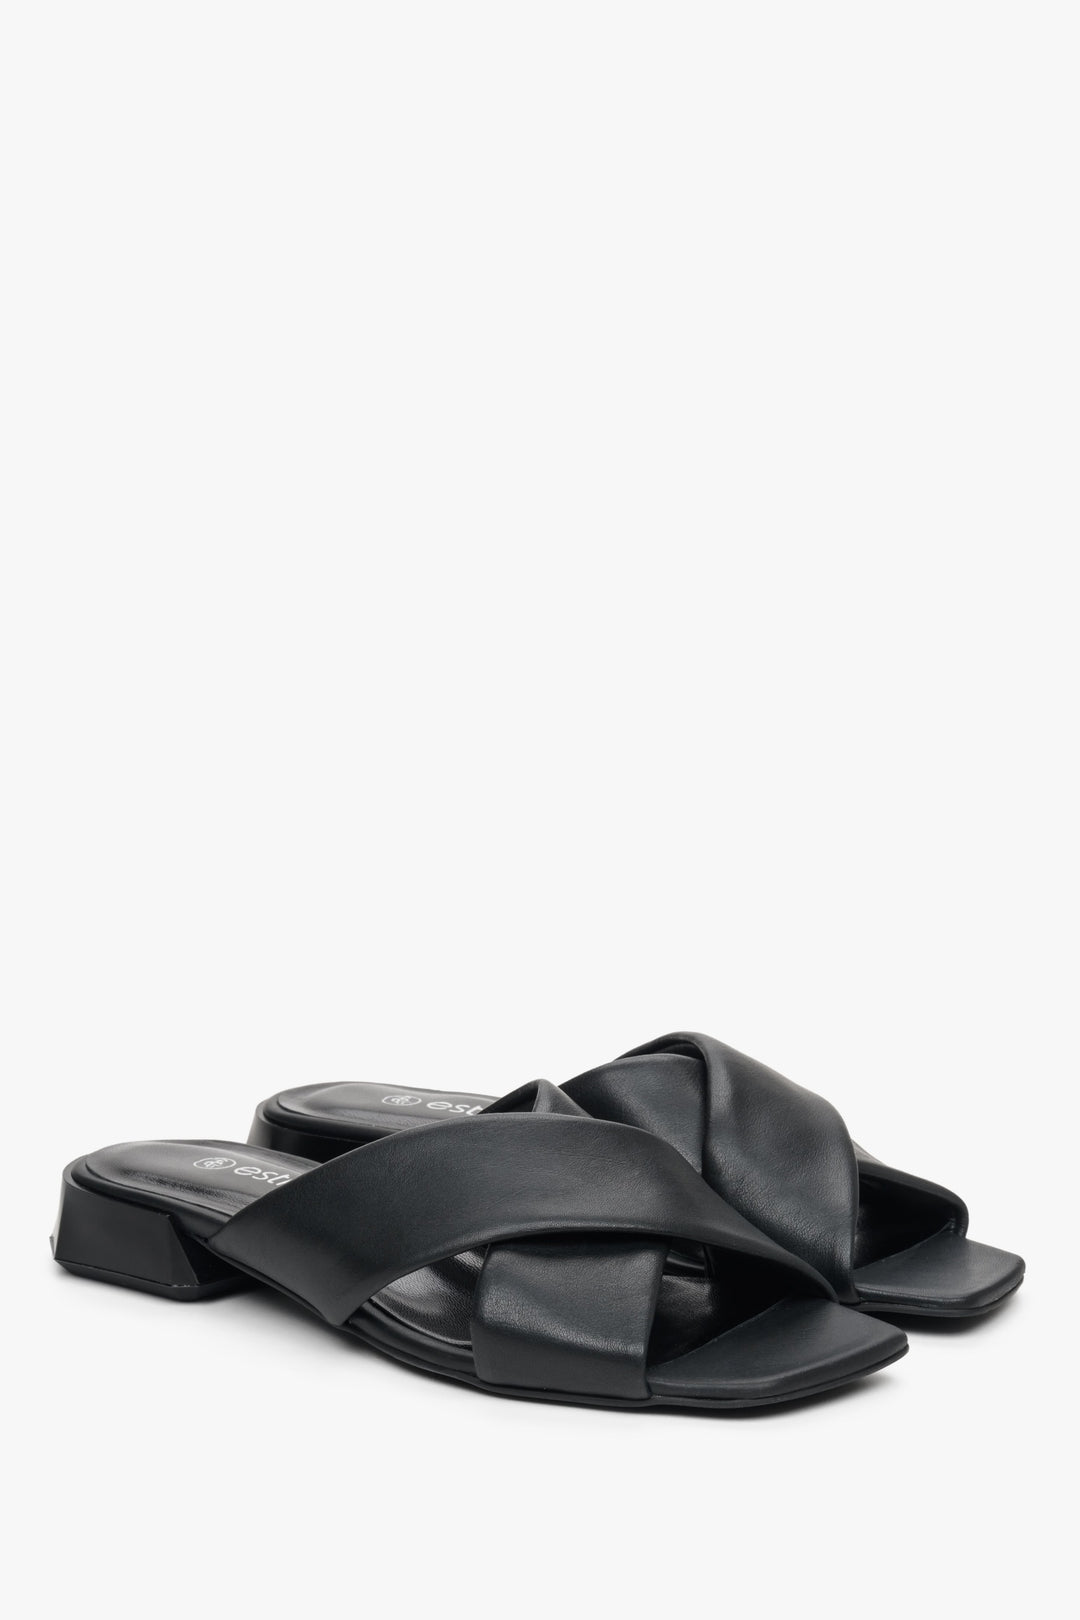 Women's Estro leather mules for summer with cross-straps on a low heel, black colour.